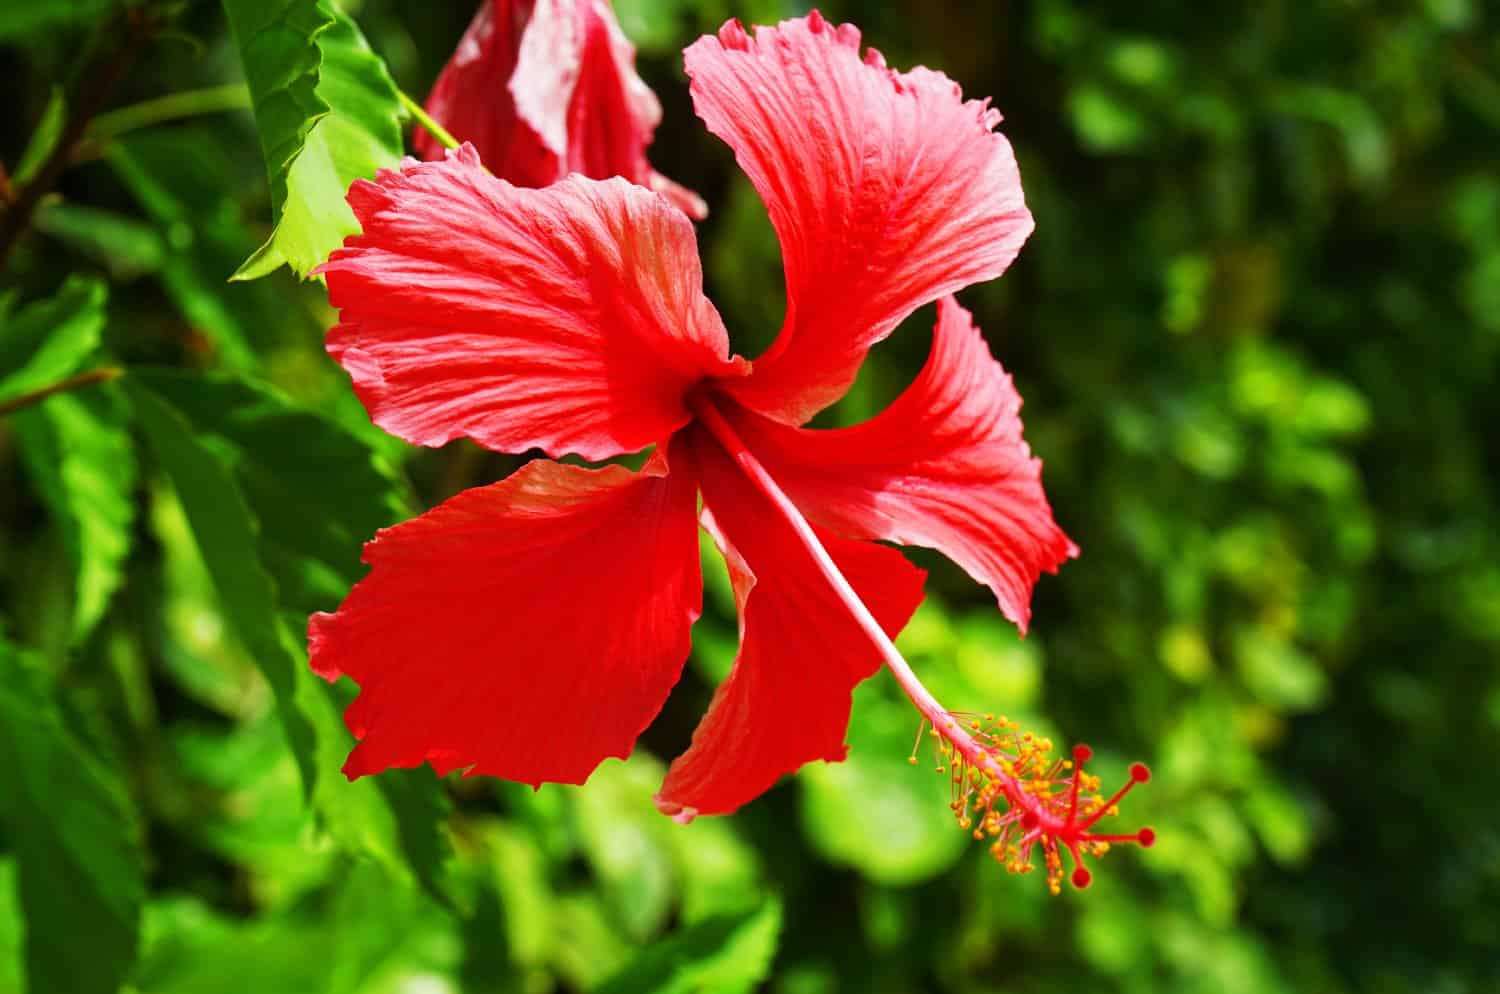 Red flower in Huahine, French Polynesia.